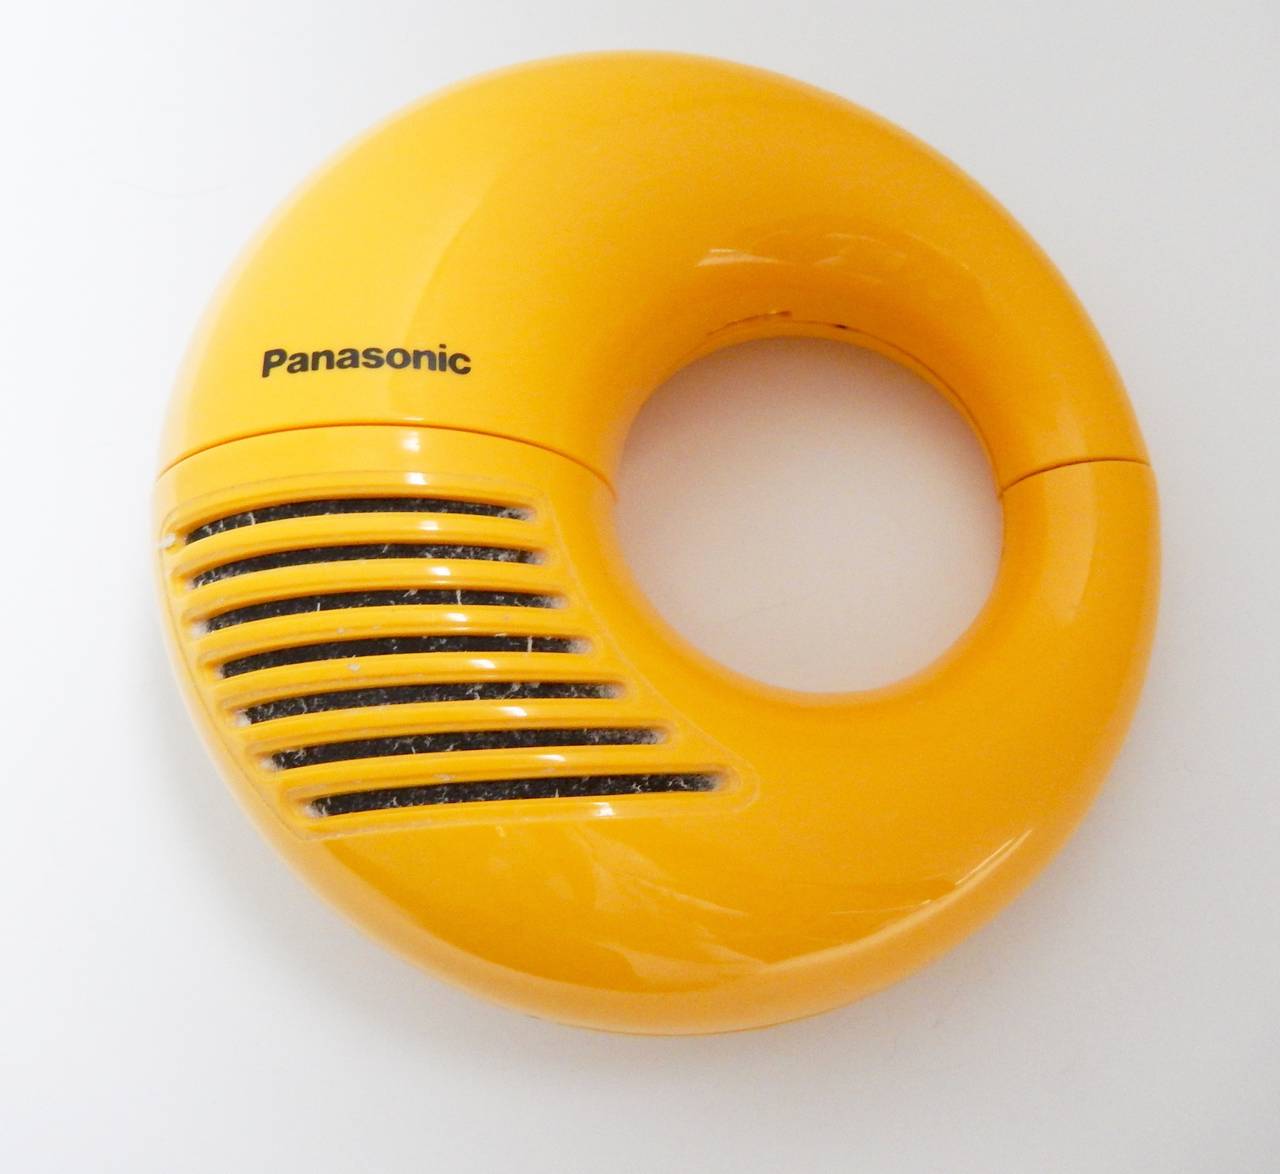 A bright yellow Toot-A-Loop AM radio by Panasonic in very good condition. 
This battery-powered wrist radio is doughnut-shaped and when twisted open, reveals the dial inside. Great, modern 1960s design. In good working condition.

An example of